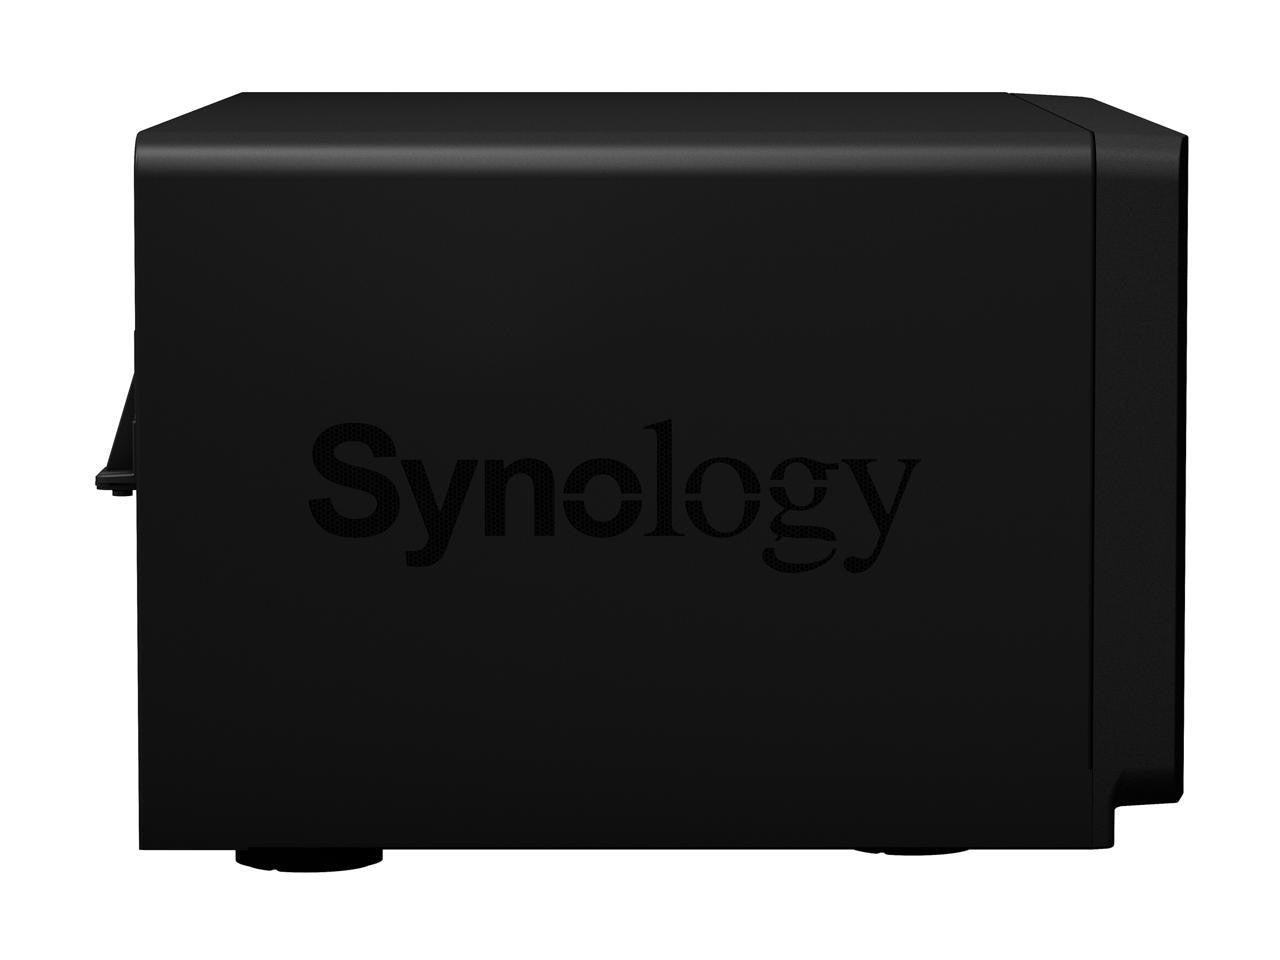 Synology DS1821+ 8-BAY DiskStation with 32GB RAM, 1.6TB (2x800GB) Cache and 64TB (8 x 8TB) of Synology Enterprise HAT5300 Drives Fully Assembled and Tested By CustomTechSales